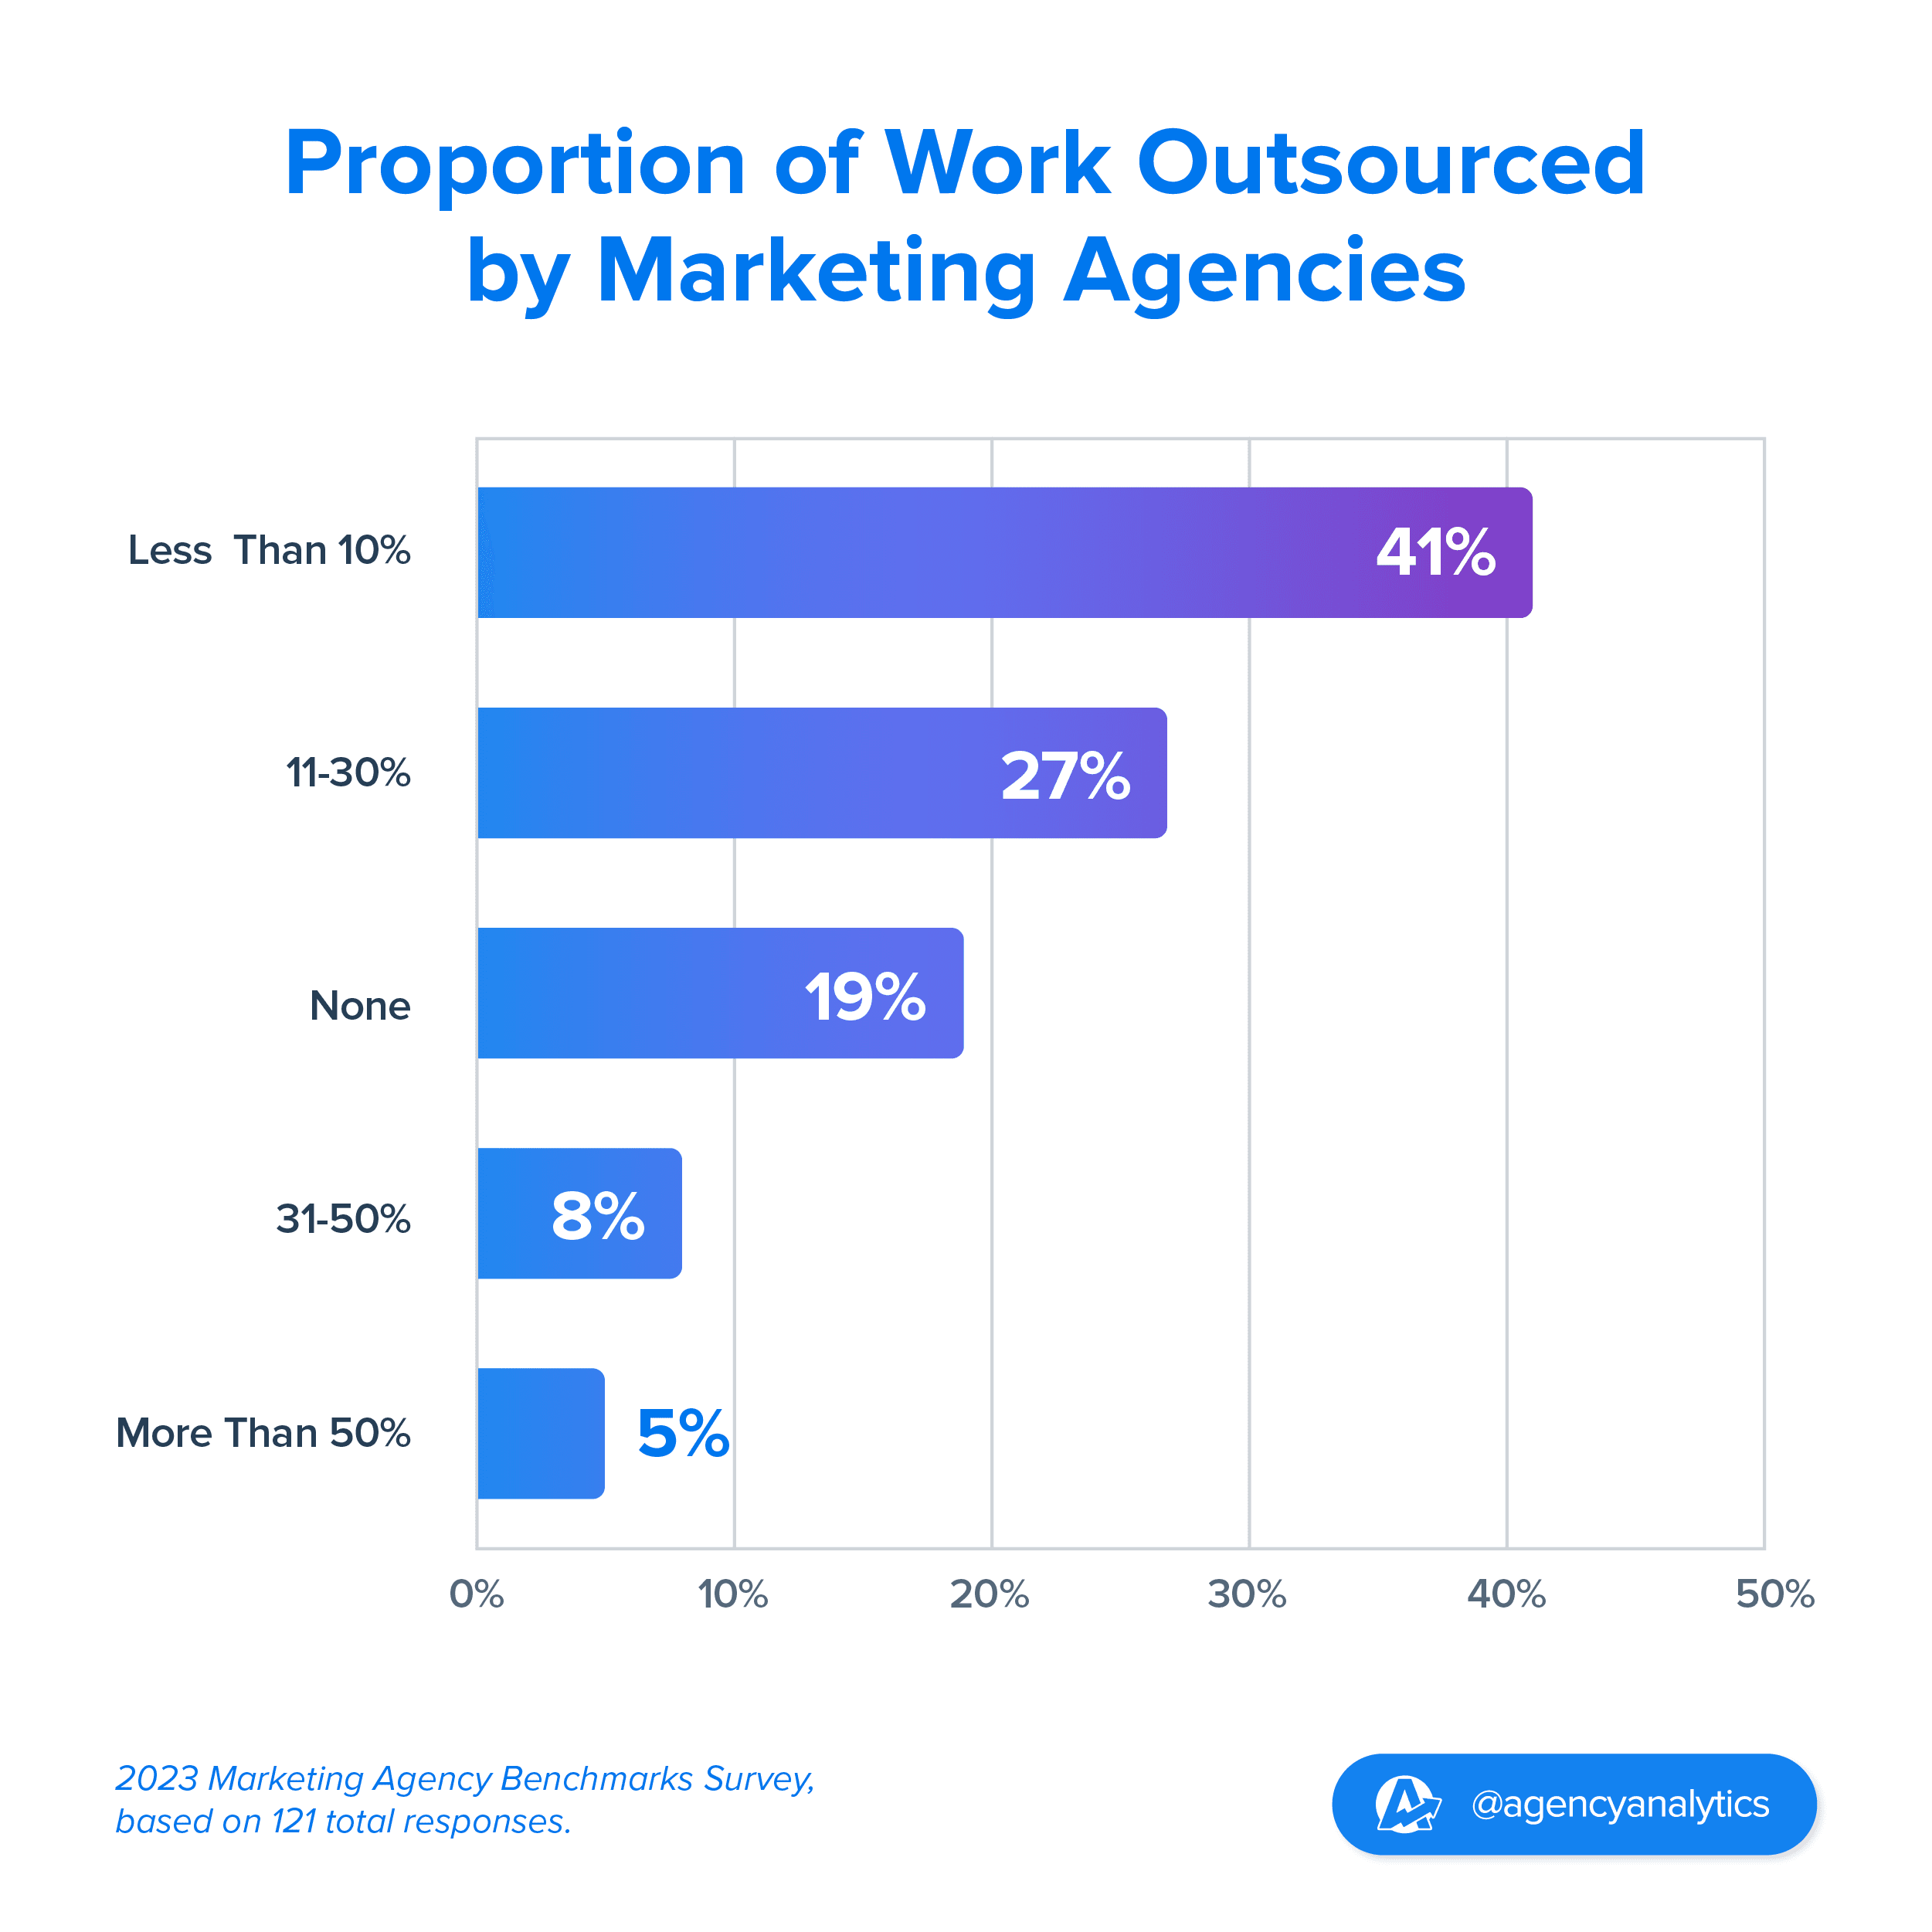 Proportion of Work Outsourced by Marketing Agencies